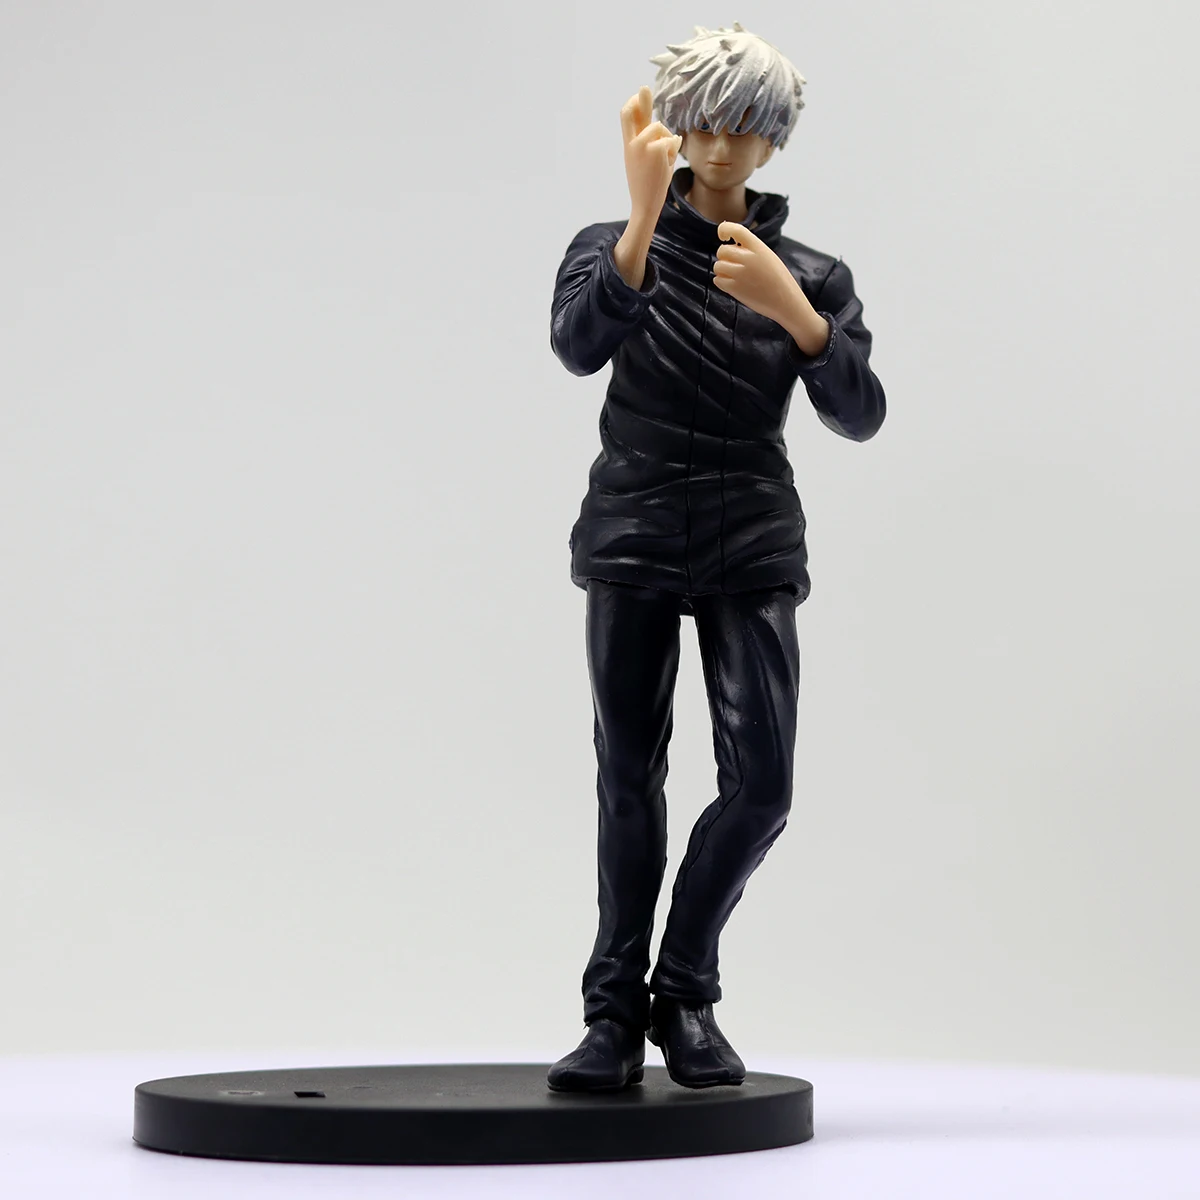 Cool Anime Figures Handsome Action Boys Decorative Ornaments Exquisite and - $15.07